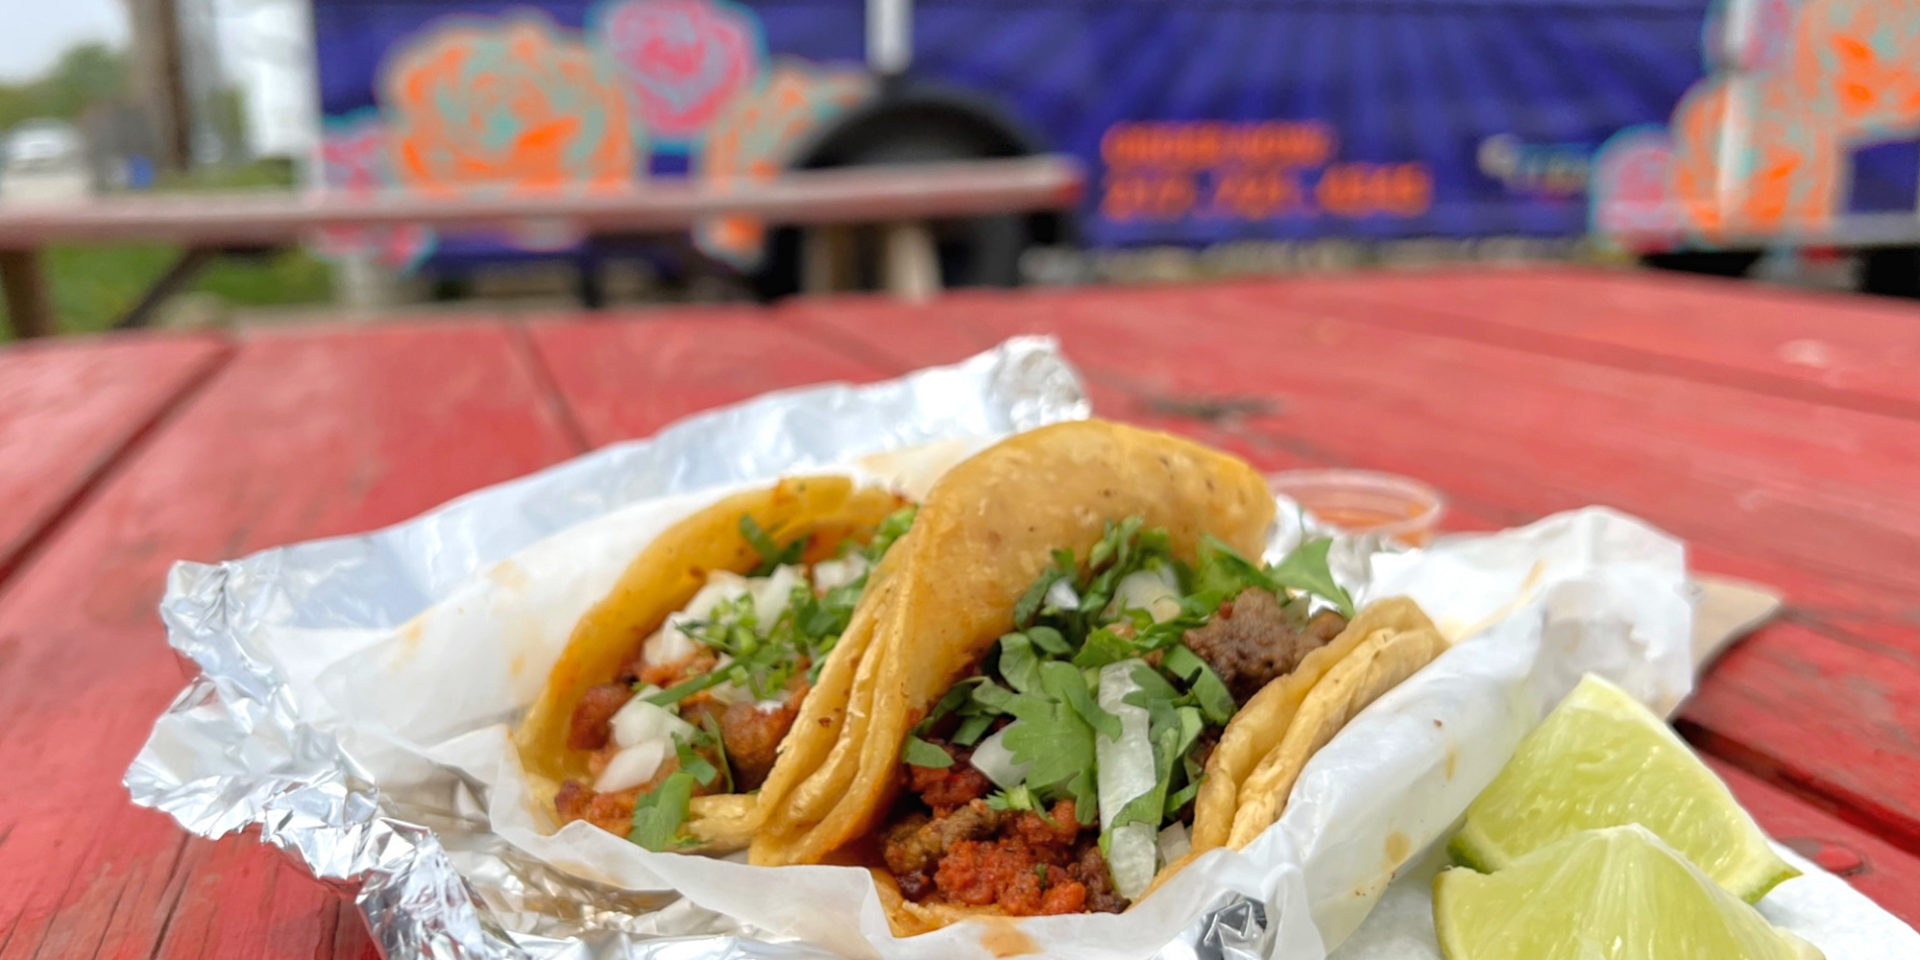 A photo of two tacos on a red table in front of Senores Taco truck. Photo by Alyssa Buckley.